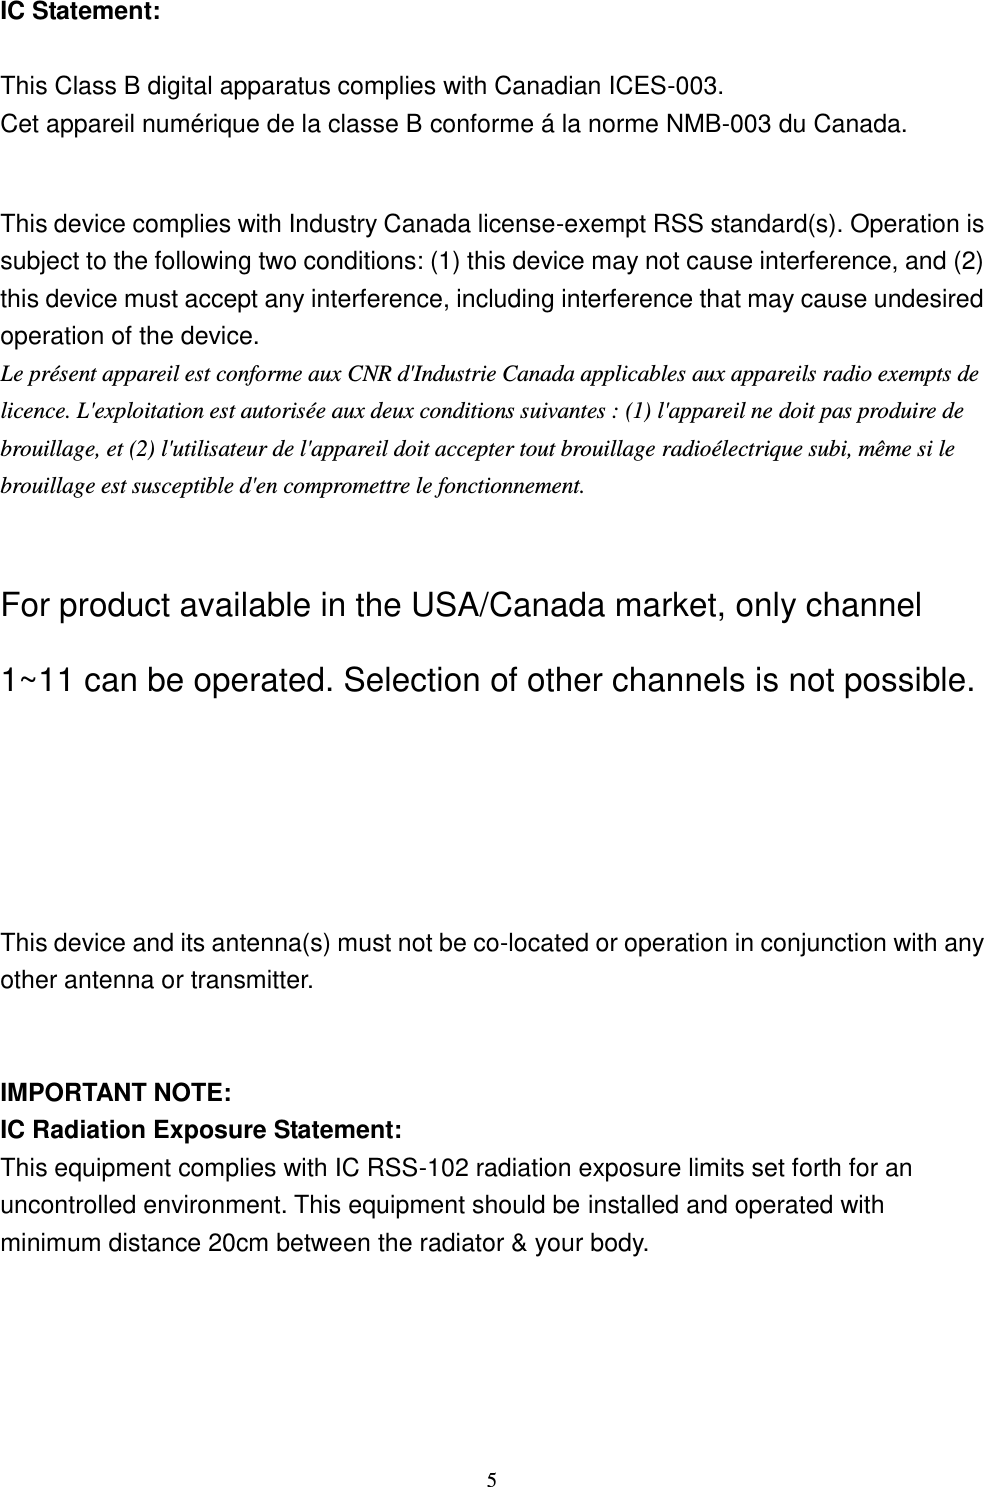  5 IC Statement:  This Class B digital apparatus complies with Canadian ICES-003. Cet appareil numérique de la classe B conforme á la norme NMB-003 du Canada.  This device complies with Industry Canada license-exempt RSS standard(s). Operation is subject to the following two conditions: (1) this device may not cause interference, and (2) this device must accept any interference, including interference that may cause undesired operation of the device. Le présent appareil est conforme aux CNR d&apos;Industrie Canada applicables aux appareils radio exempts de licence. L&apos;exploitation est autorisée aux deux conditions suivantes : (1) l&apos;appareil ne doit pas produire de brouillage, et (2) l&apos;utilisateur de l&apos;appareil doit accepter tout brouillage radioélectrique subi, même si le brouillage est susceptible d&apos;en compromettre le fonctionnement.  For product available in the USA/Canada market, only channel 1~11 can be operated. Selection of other channels is not possible.   This device and its antenna(s) must not be co-located or operation in conjunction with any other antenna or transmitter.   IMPORTANT NOTE: IC Radiation Exposure Statement: This equipment complies with IC RSS-102 radiation exposure limits set forth for an uncontrolled environment. This equipment should be installed and operated with minimum distance 20cm between the radiator &amp; your body.  